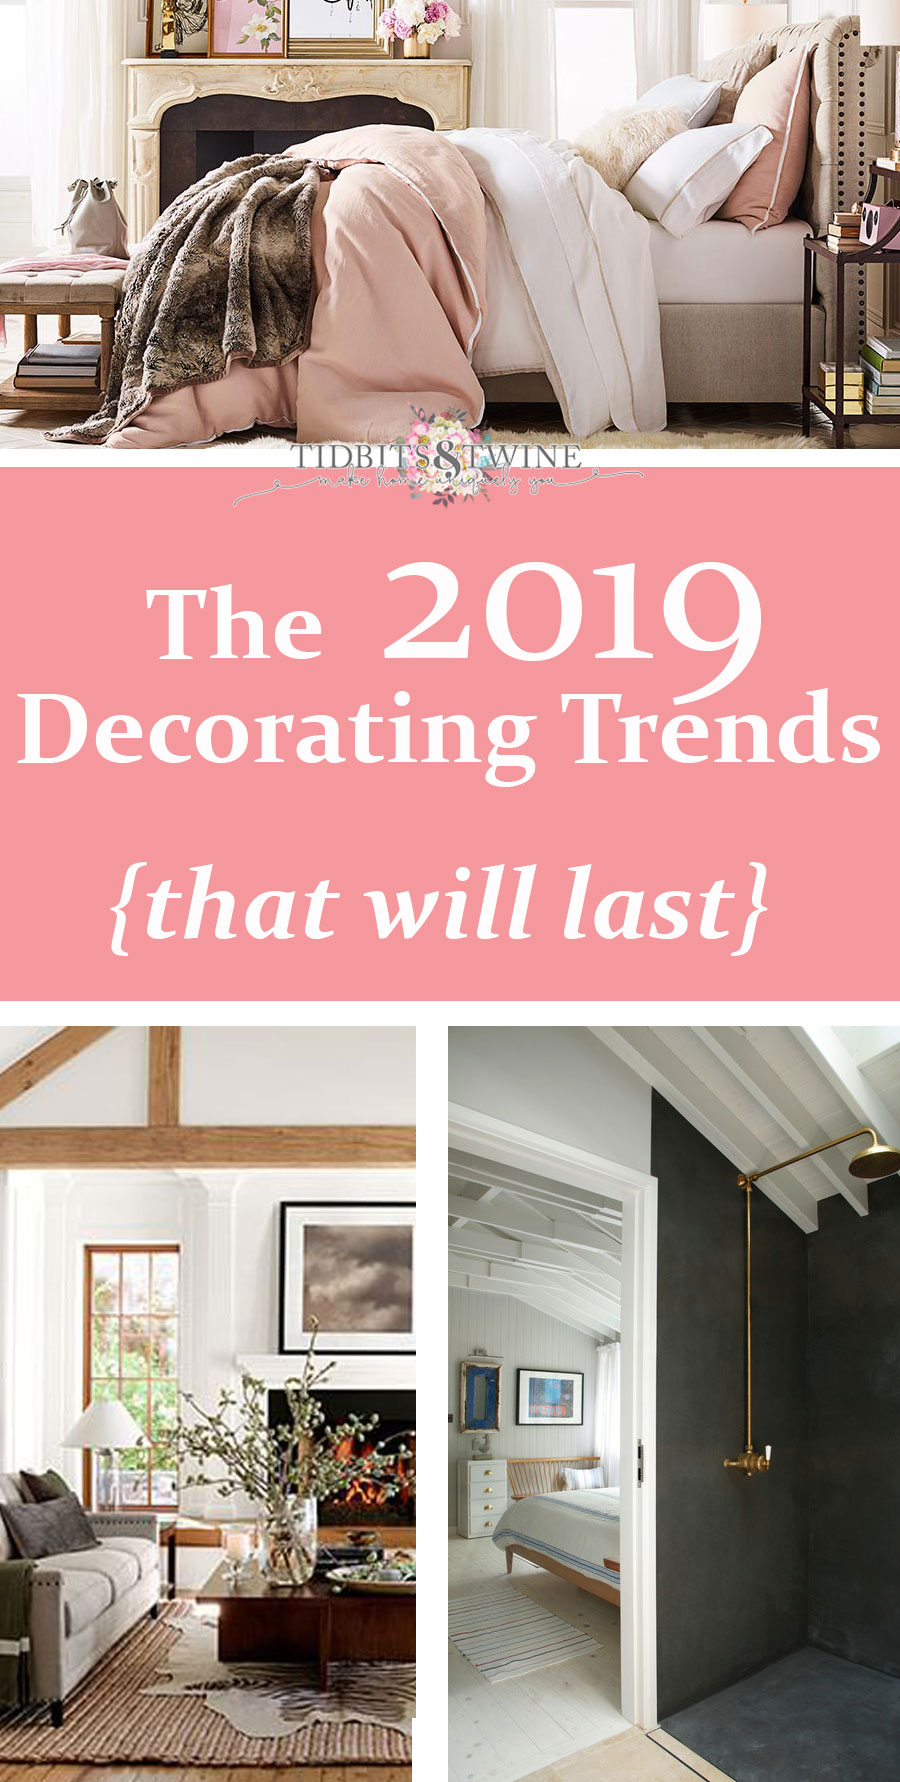 The 2019 Decorating Trends {that will last}